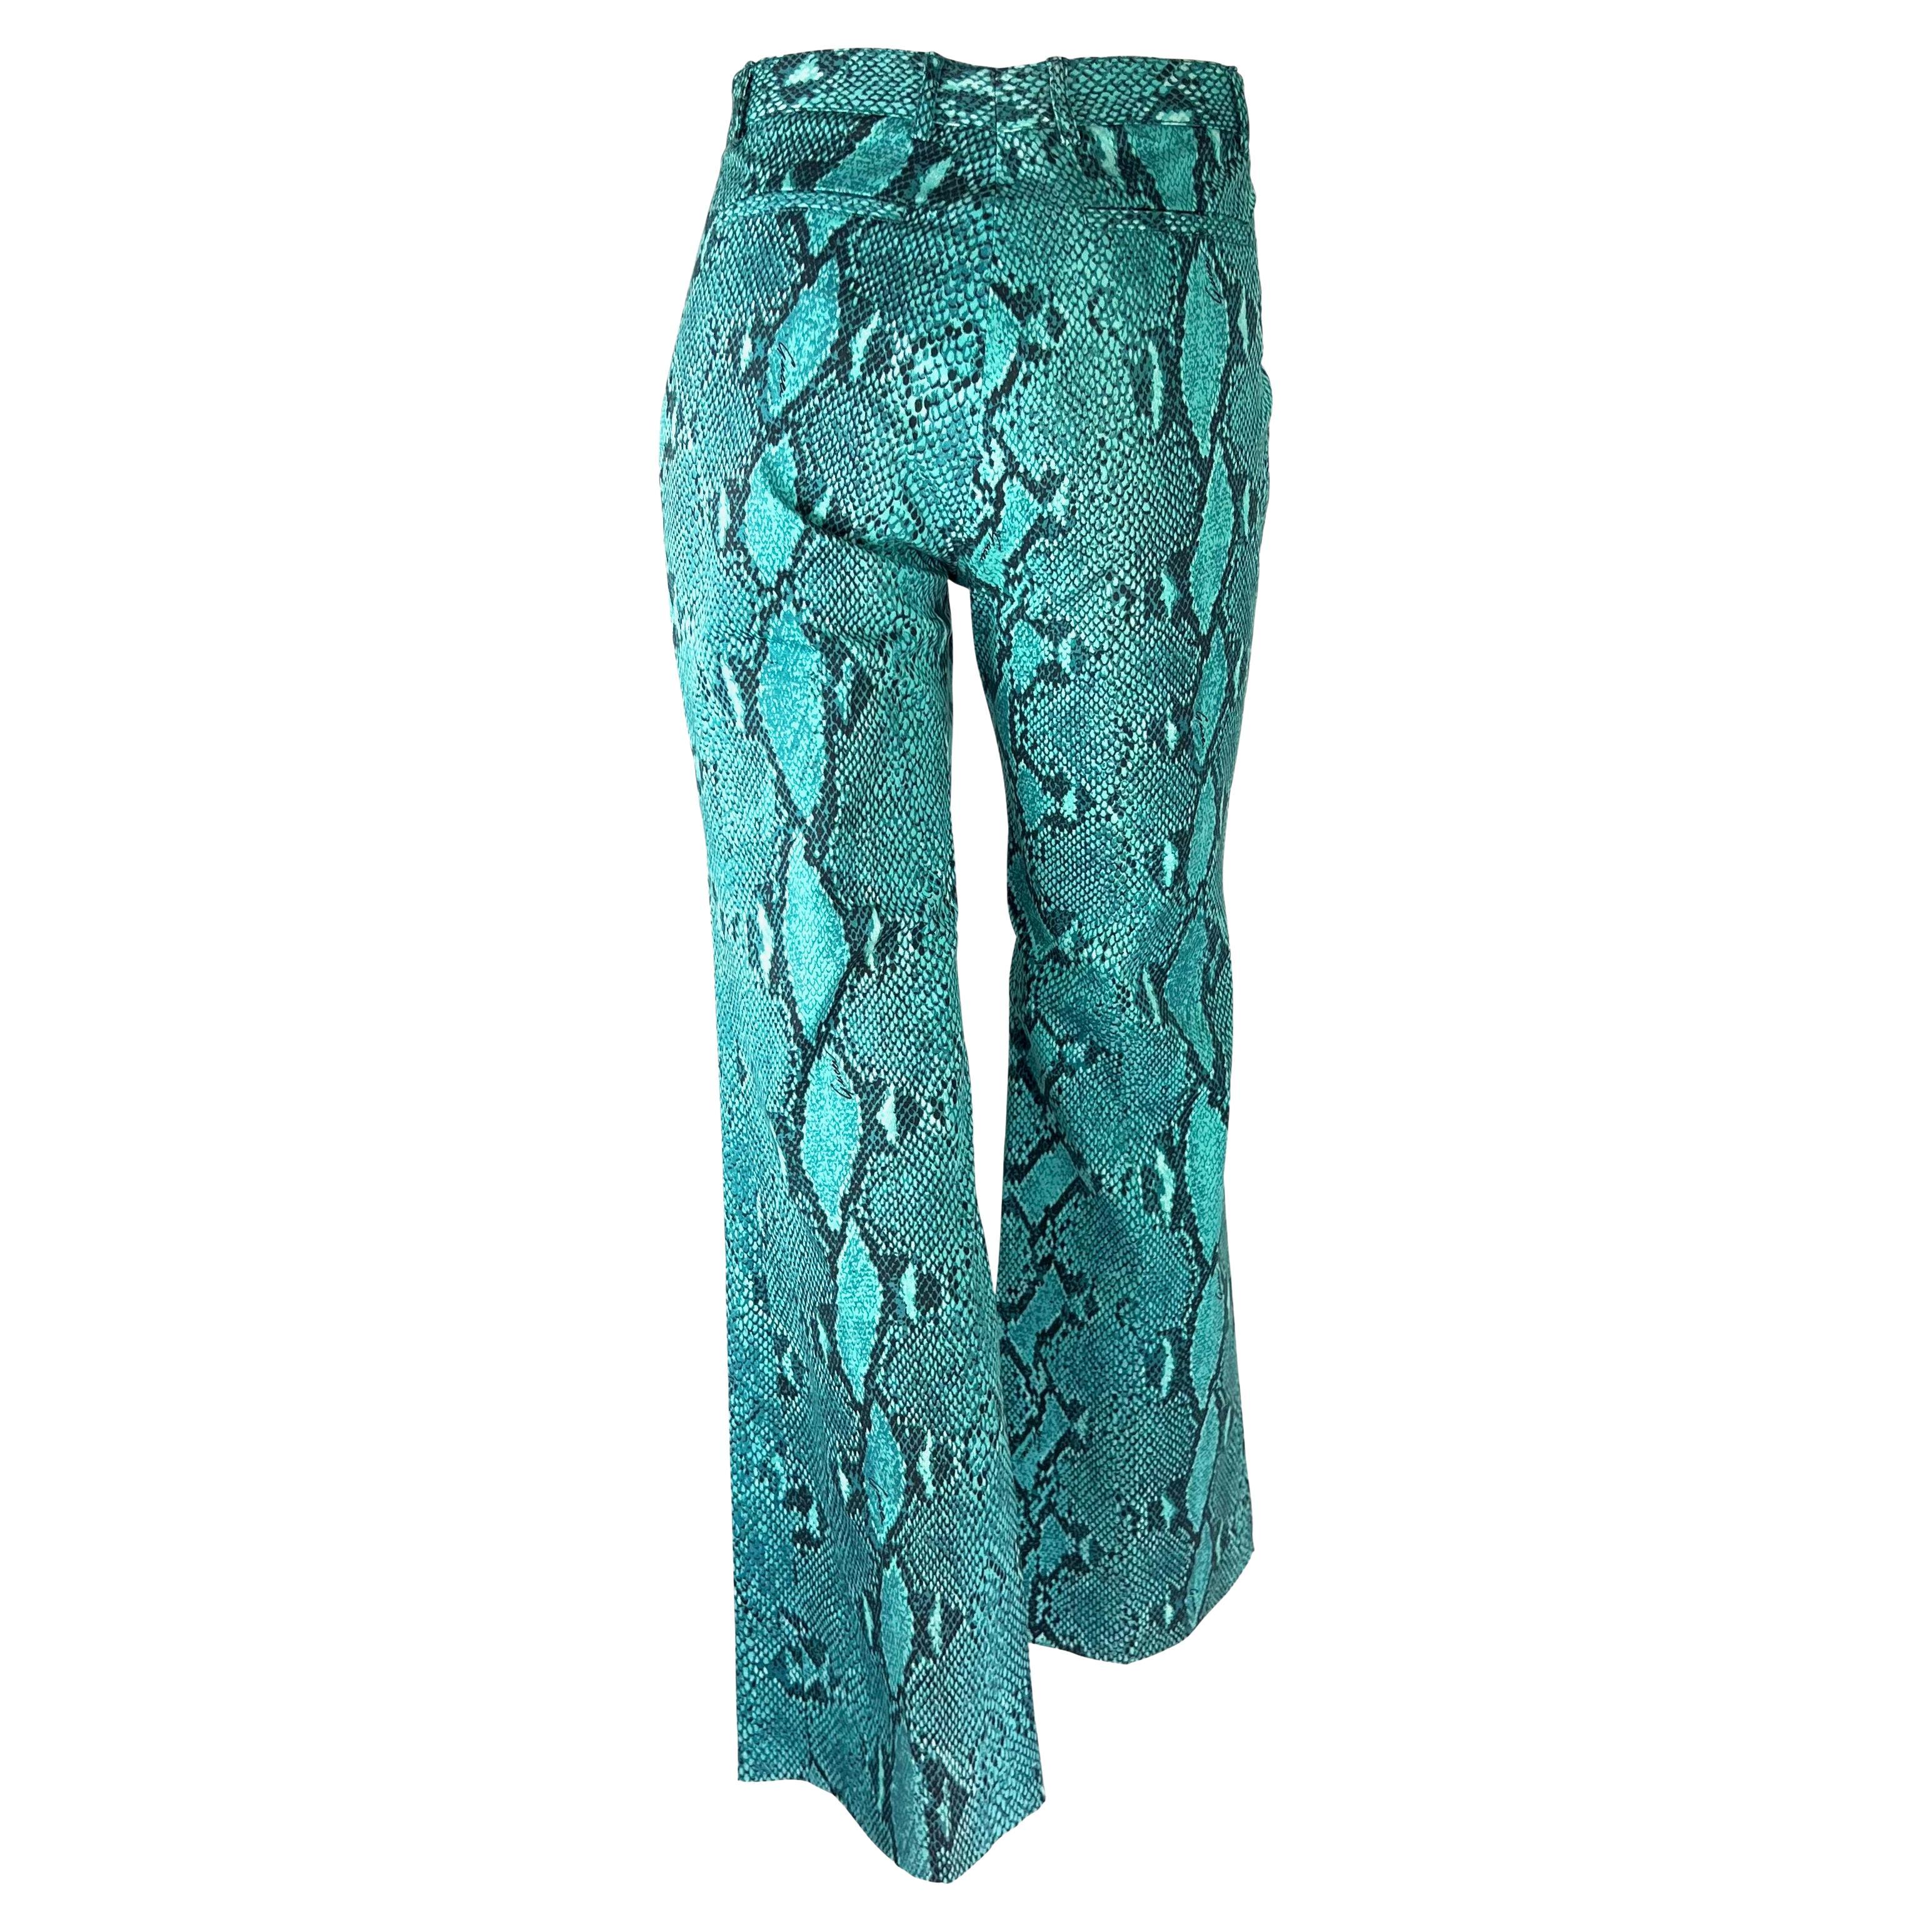 Blue S/S 2000 Gucci by Tom Ford Turquoise Snakeskin Logo Print Stretch Flare Pants